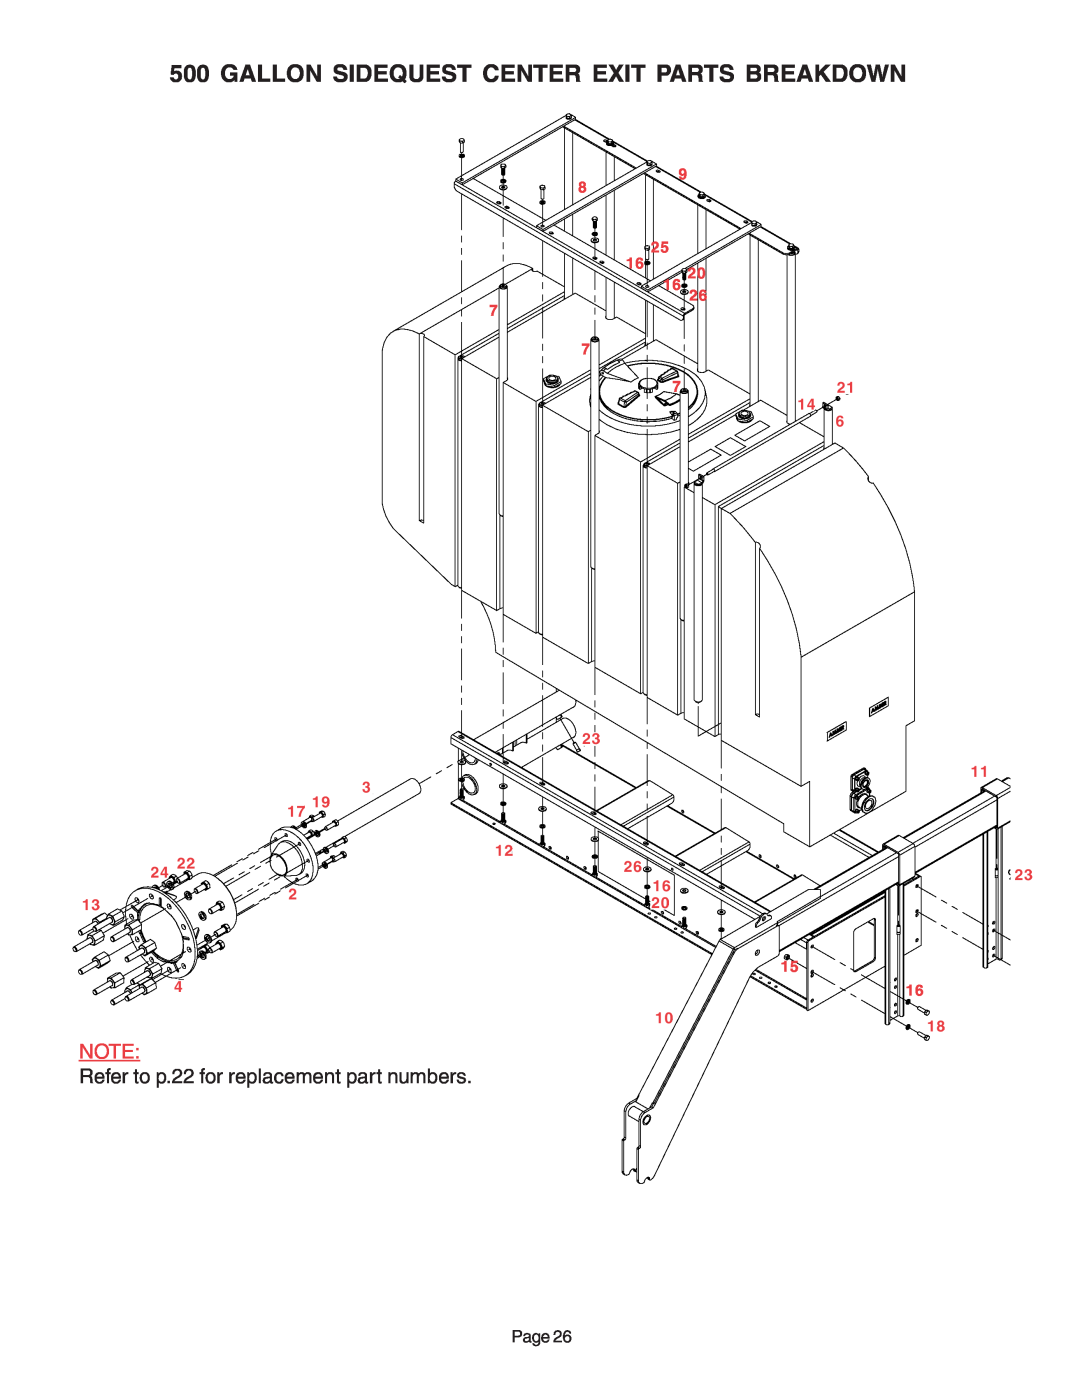 Demco AC20037 manual Gallon Sidequest Center Exit Parts Breakdown, Refer to p.22 for replacement part numbers, 1521 